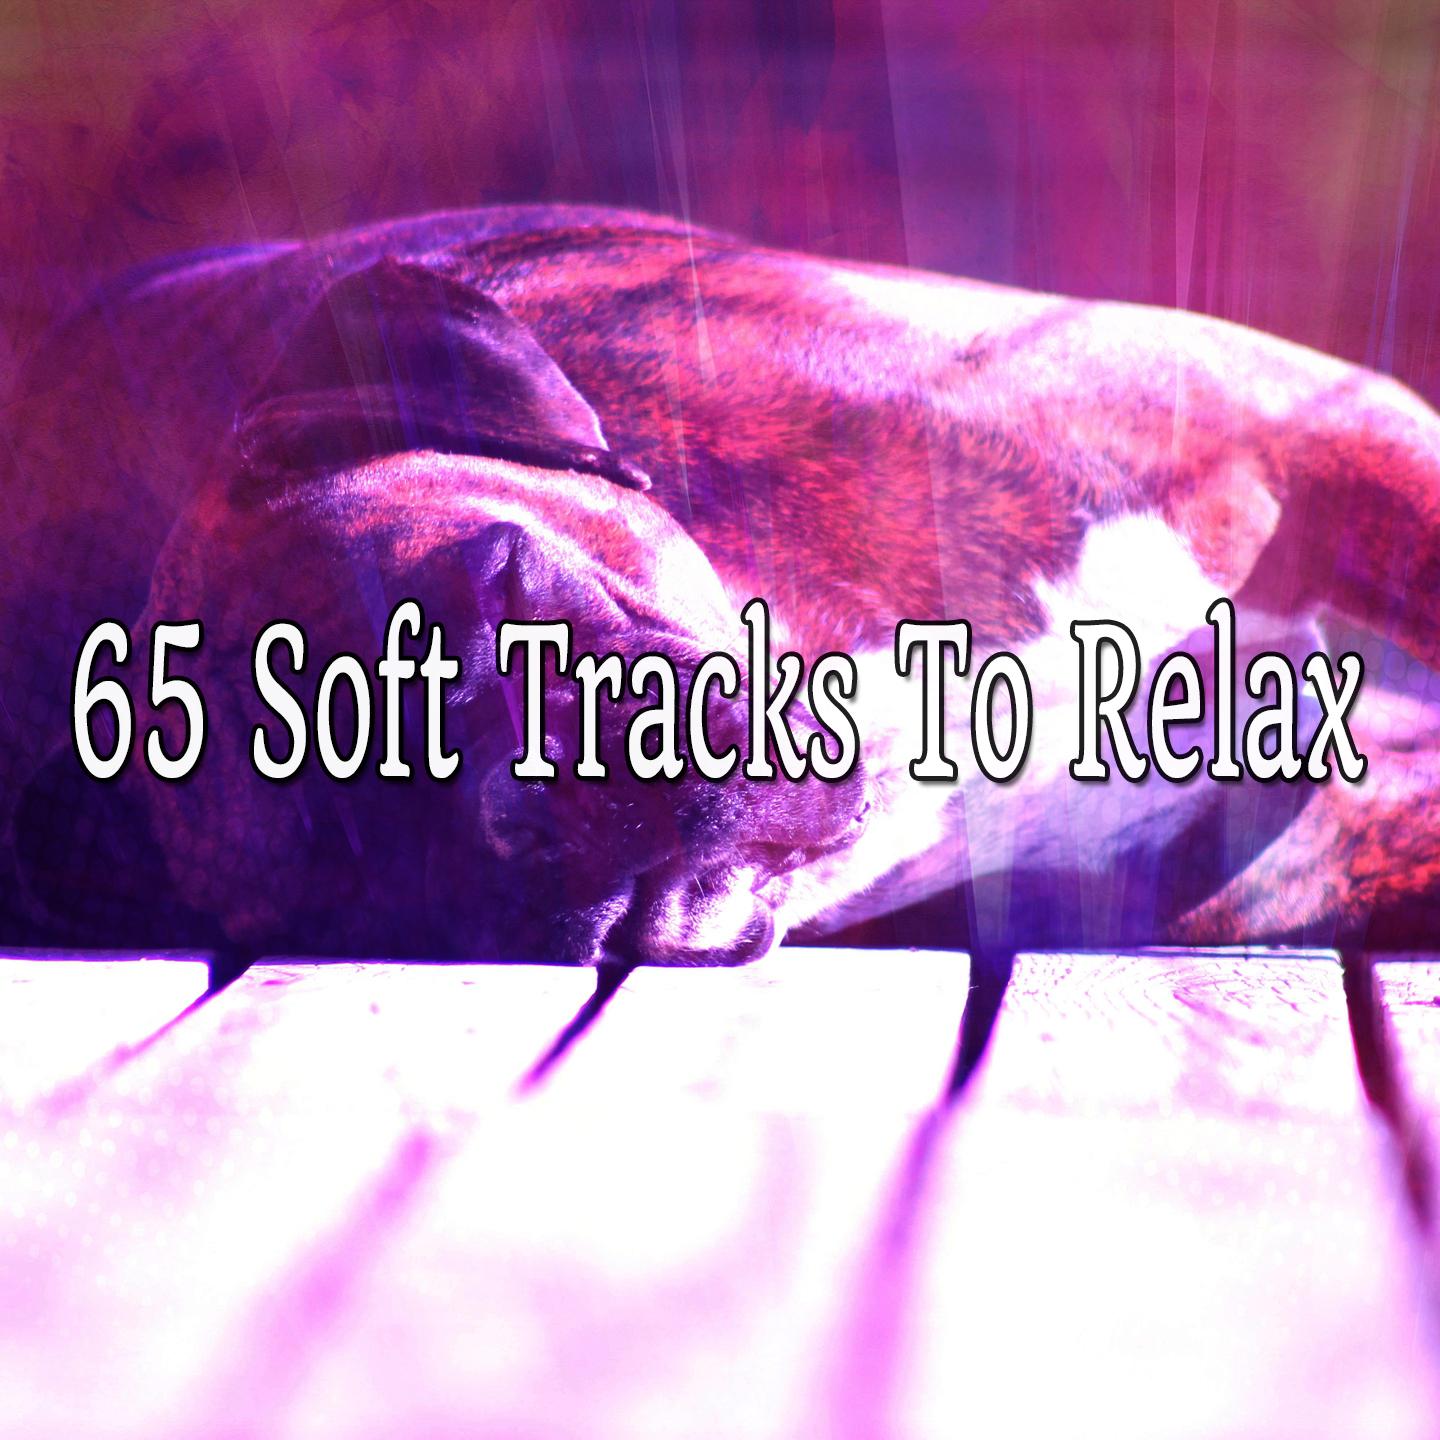 65 Soft Tracks To Relax